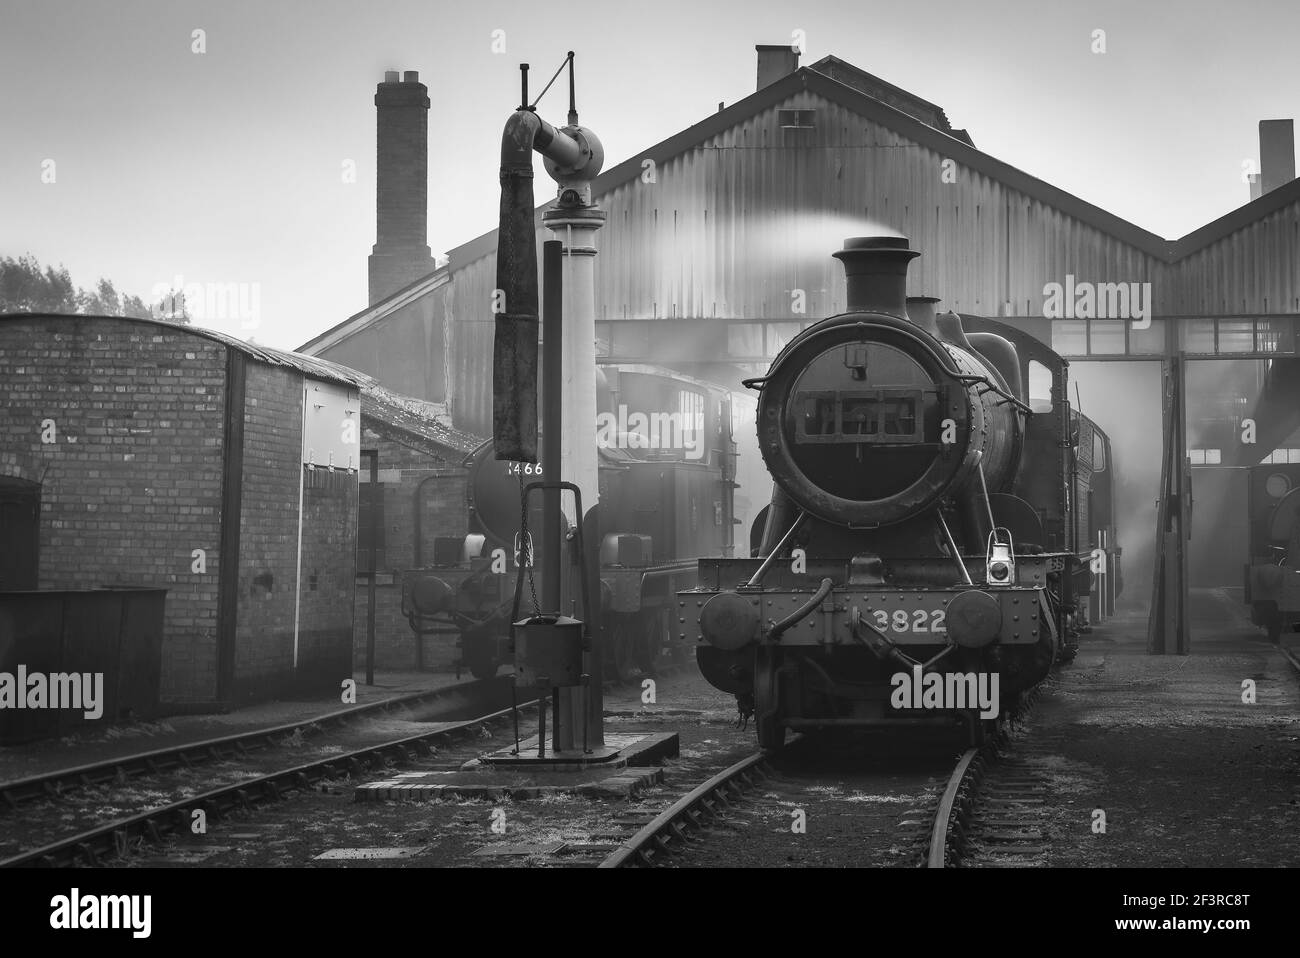 Steam Engine 3822, a 2884 Class Locomotive, outside the engine shed at Didcot Railway Centre, Oxfordshire, England, UK Stock Photo